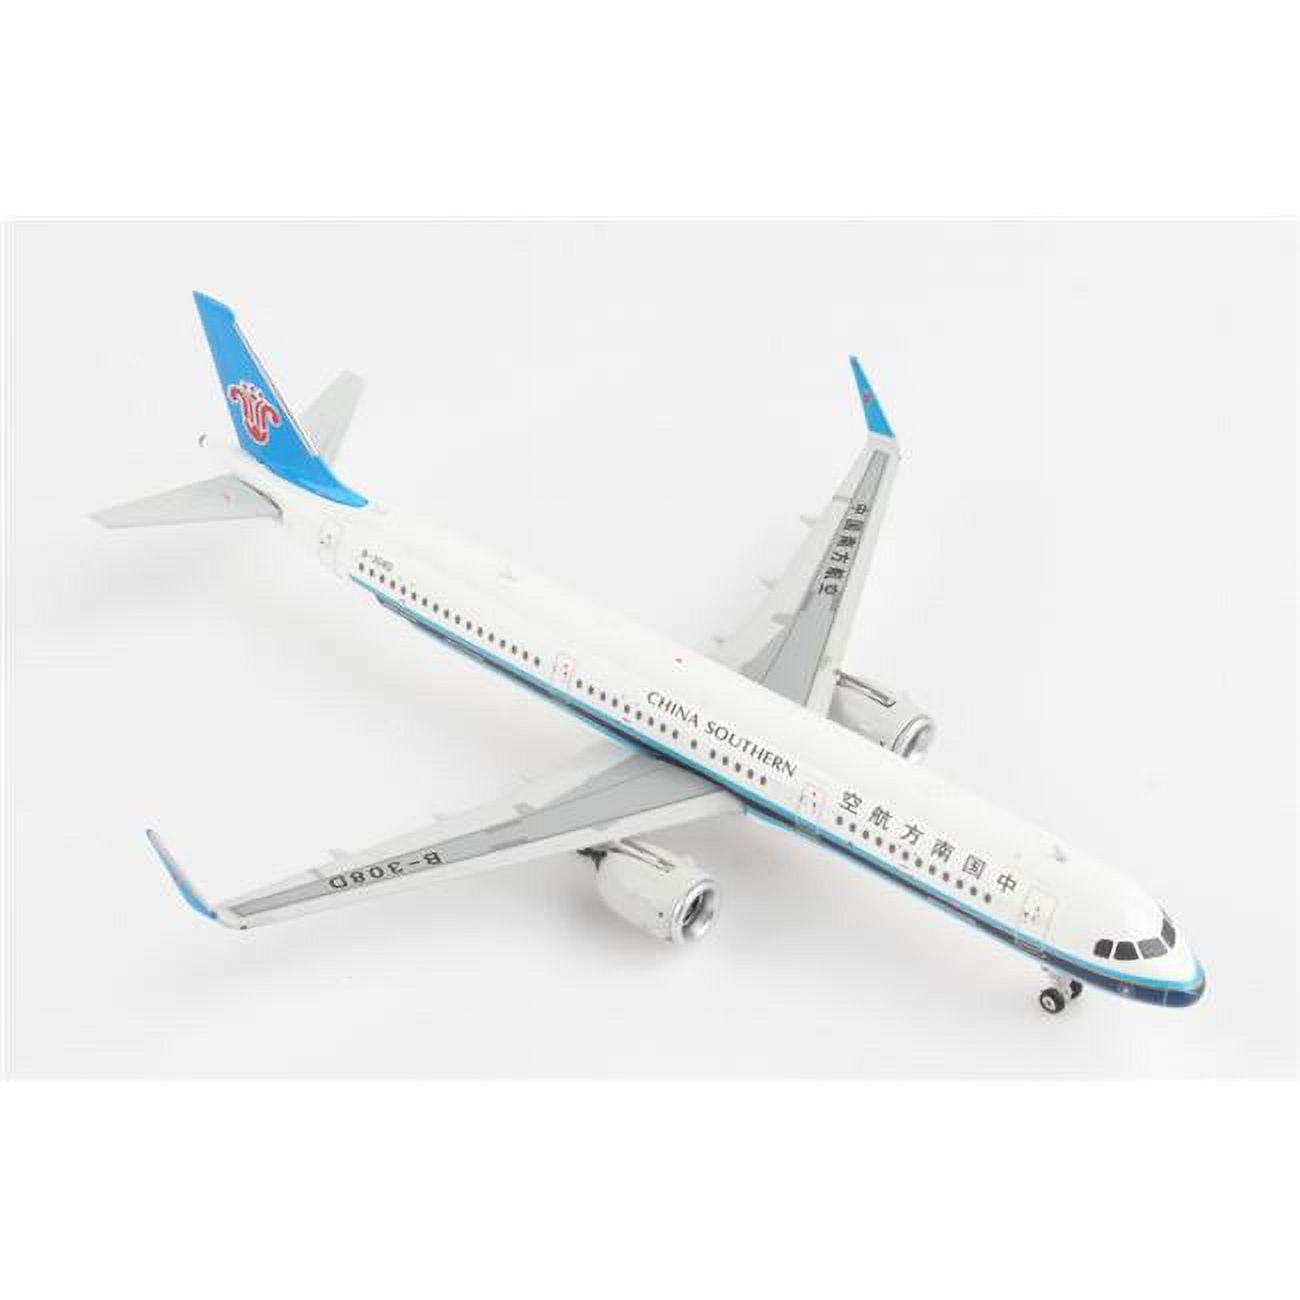 Picture of Phoenix Diecast PH2124 1-400 Scale No.B-308D Reg China Southern A321Neo Model Airplane